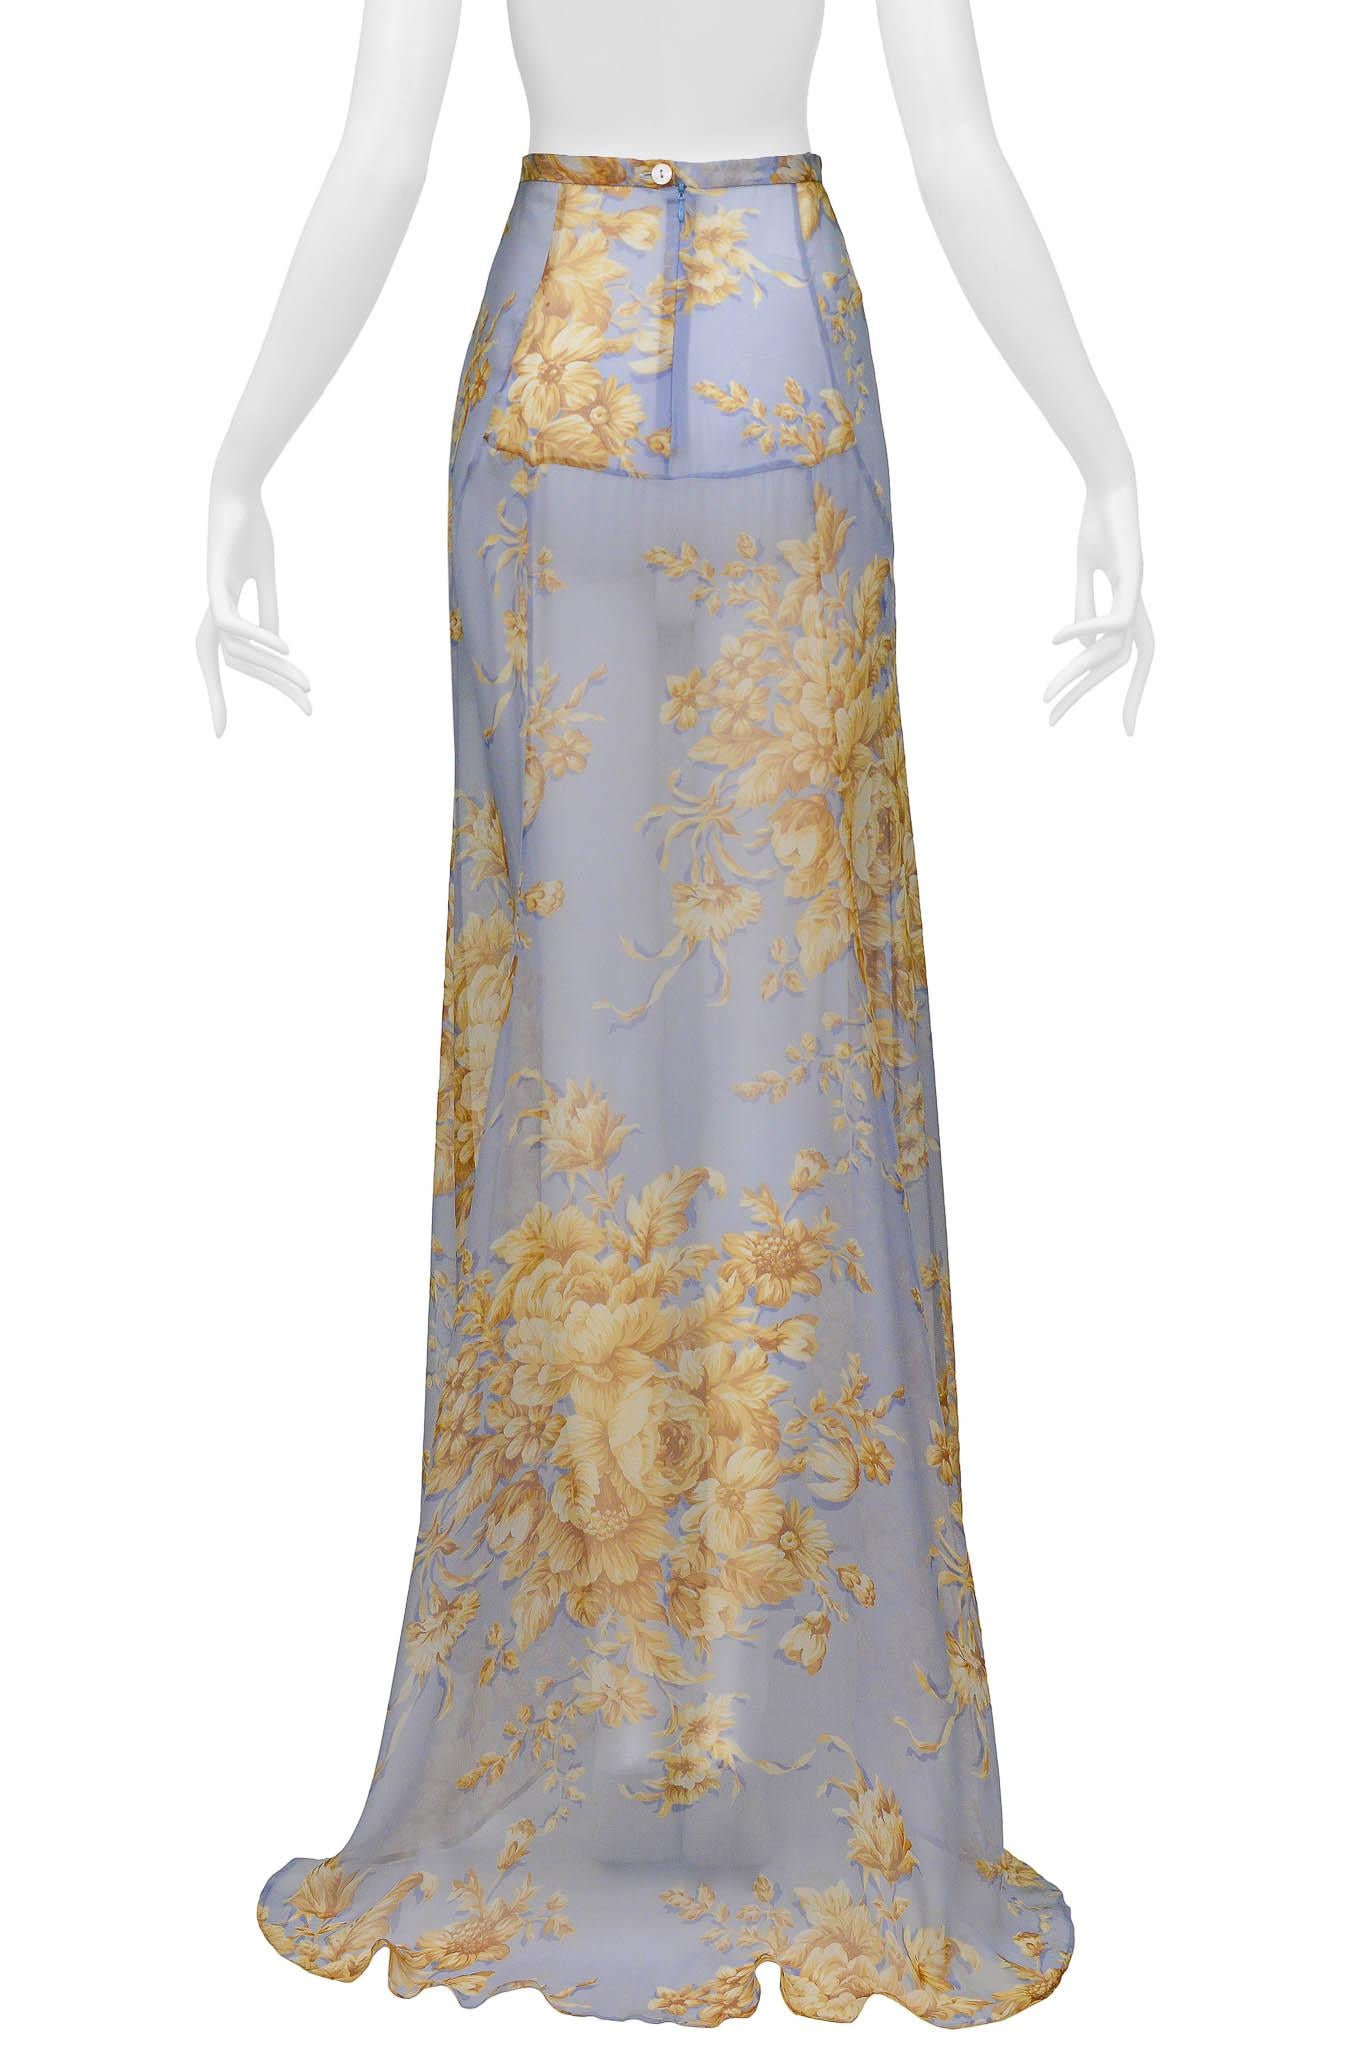 Dolce & Gabbana Blue Maxi Skirt With Tan Floral Pattern For Sale 1